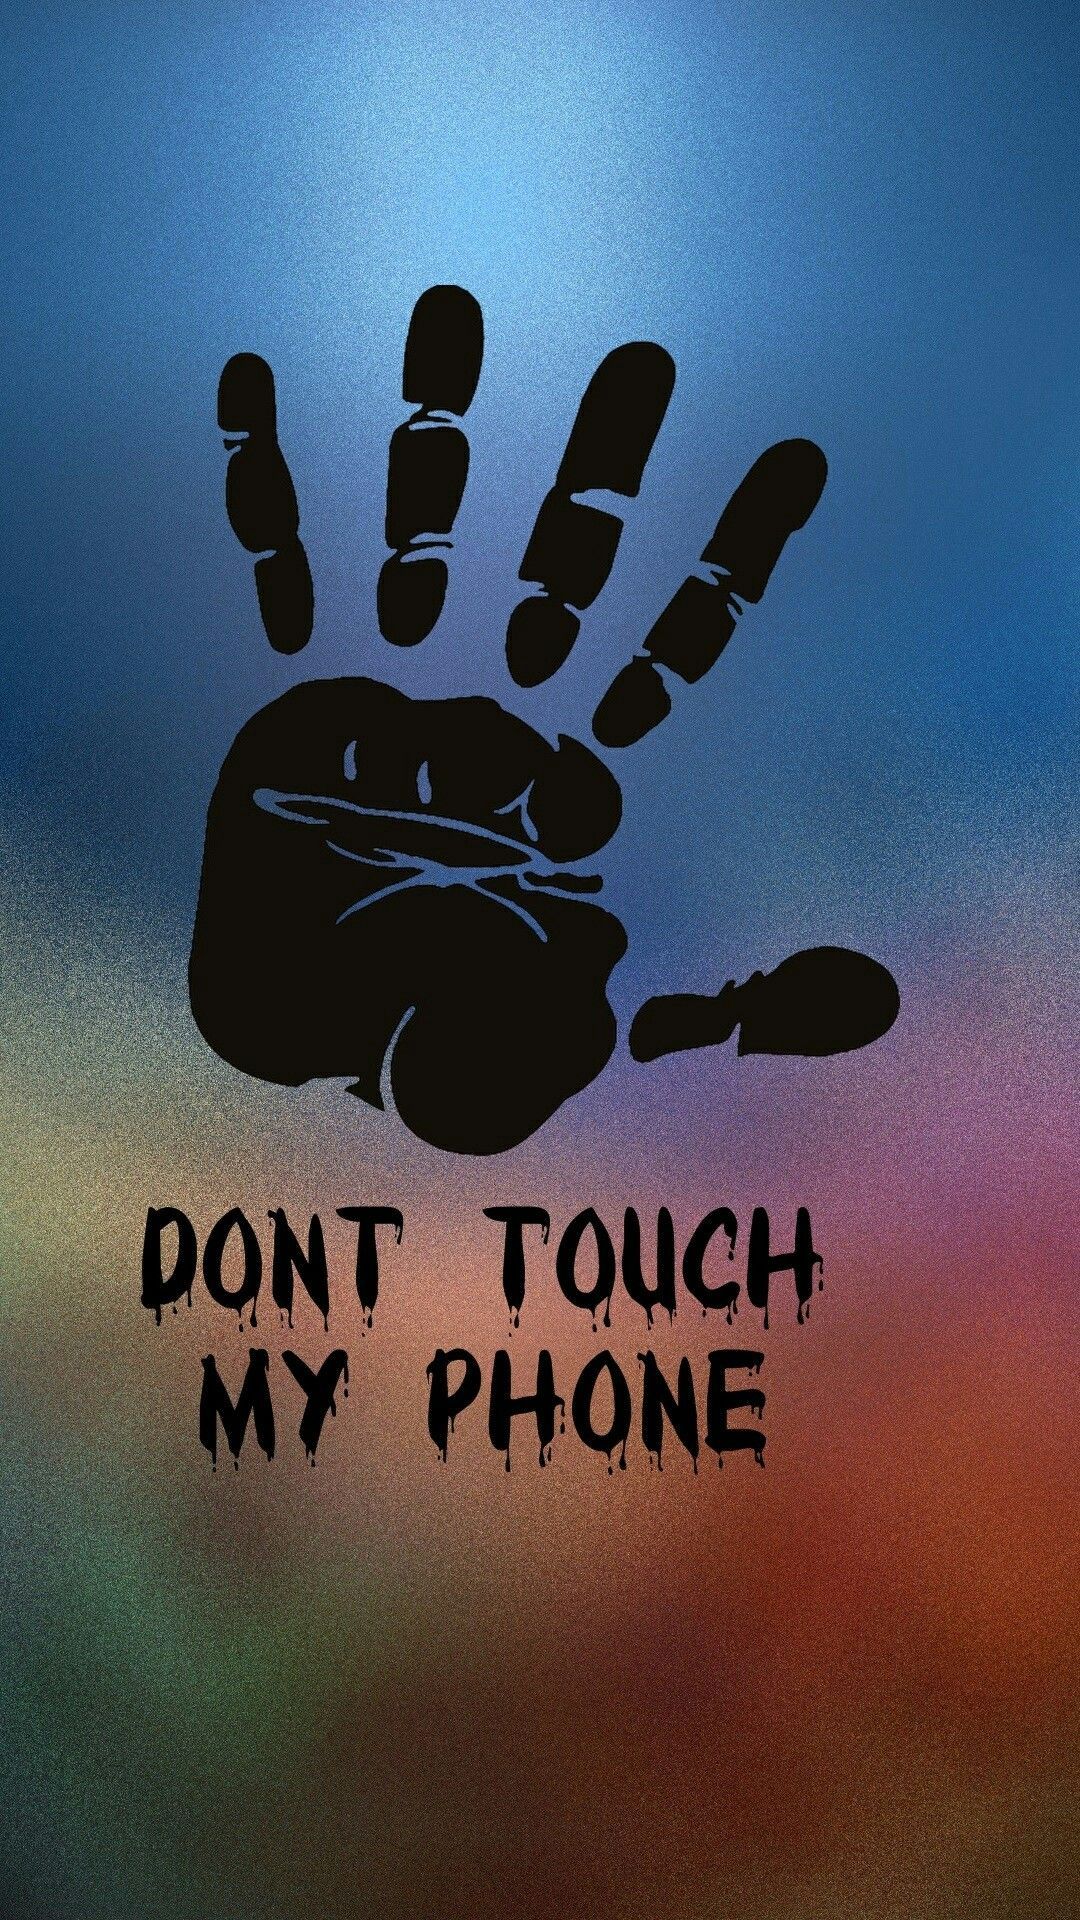 Don't Touch My Phone. Dont touch my phone wallpaper, Locked